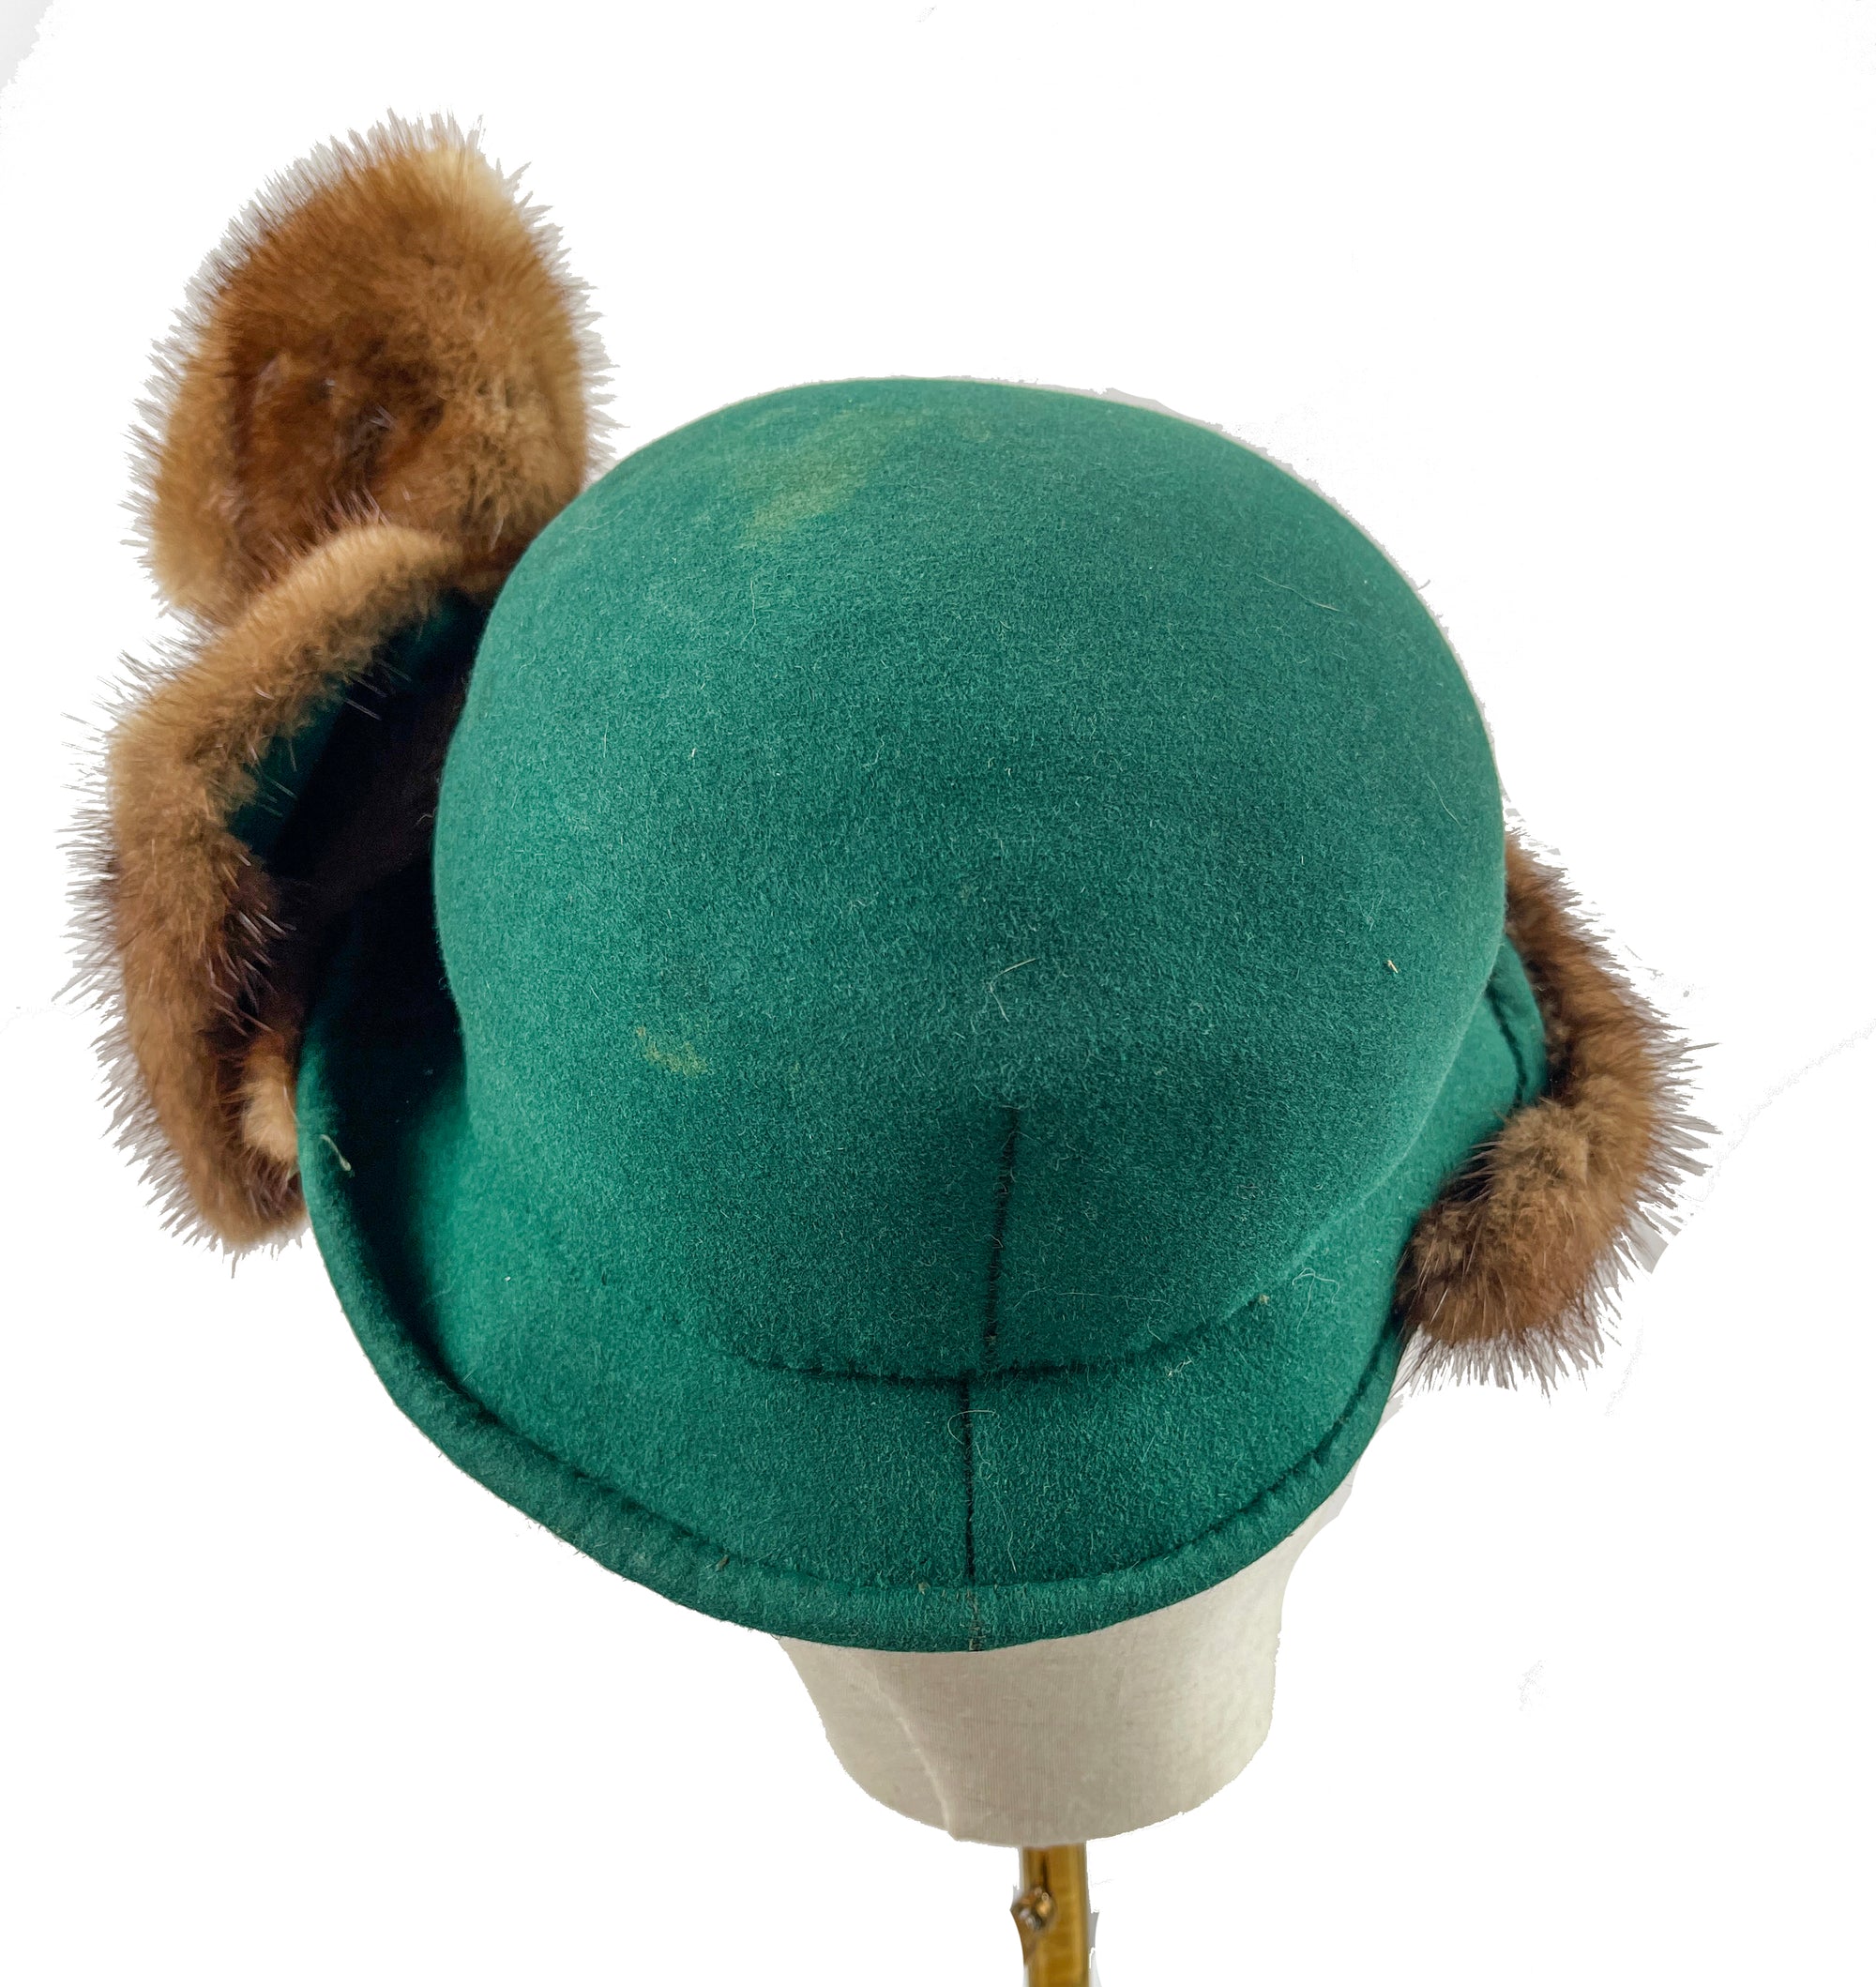 Vintage Bess Stein Green Felt Cloche with Mink Trim and Beaded Bow